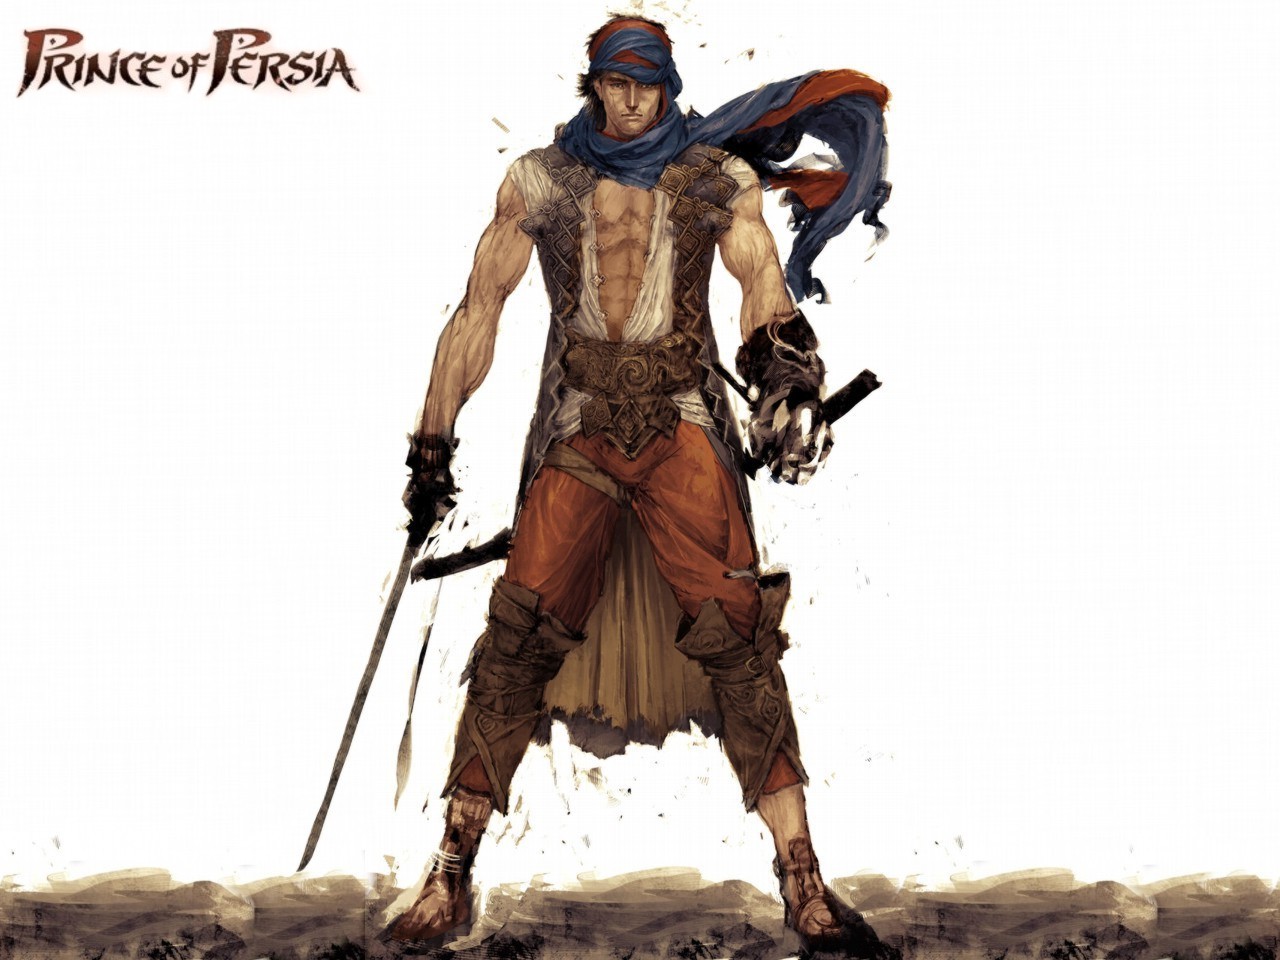 Download HQ Prince of Persia wallpaper / Games / 1280x960